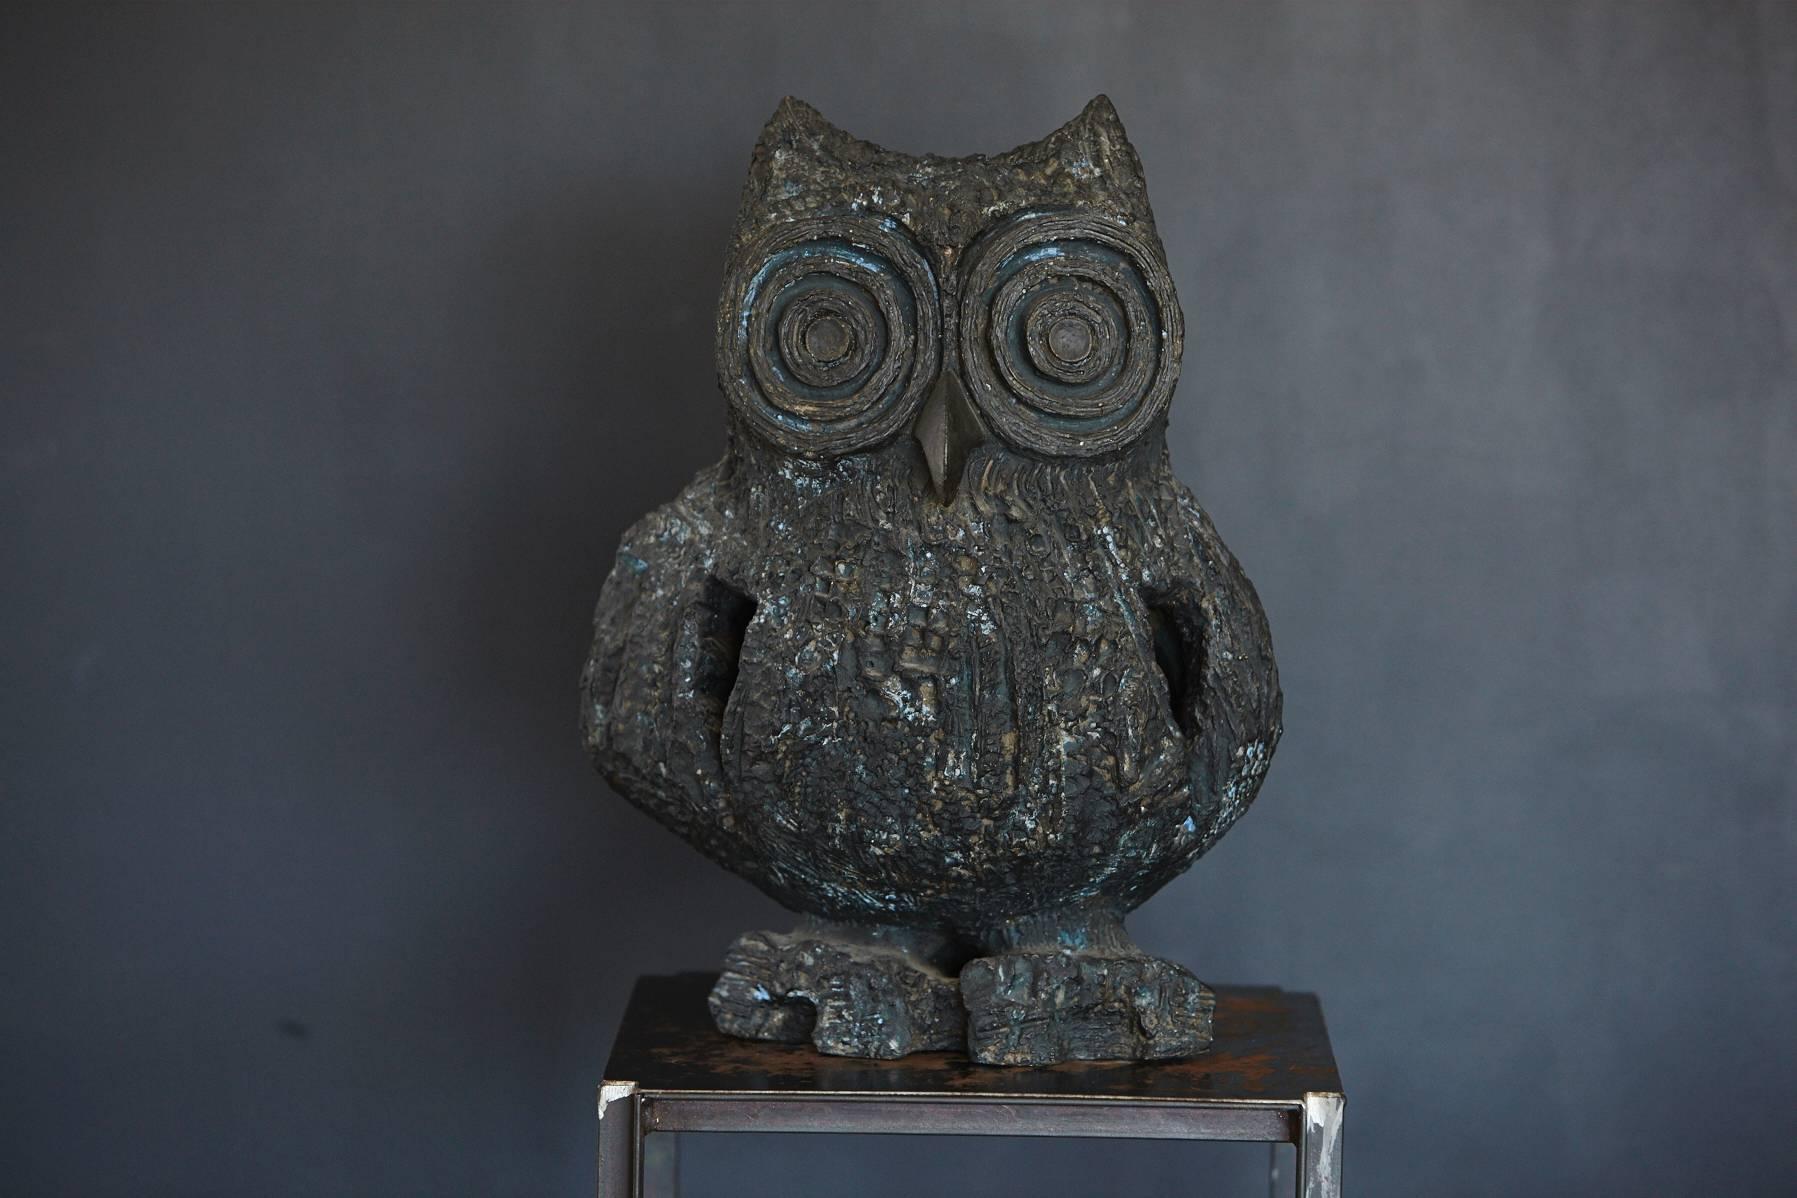 Extraordinary large ceramic owl in a brutalist style, with nice details in excellent condition, partly glazed, was made in the 1960s. Weight 13 lbs.

Margot Kempe (1898-1981) was a German/American sculptor who moved to the United States in 1947.
